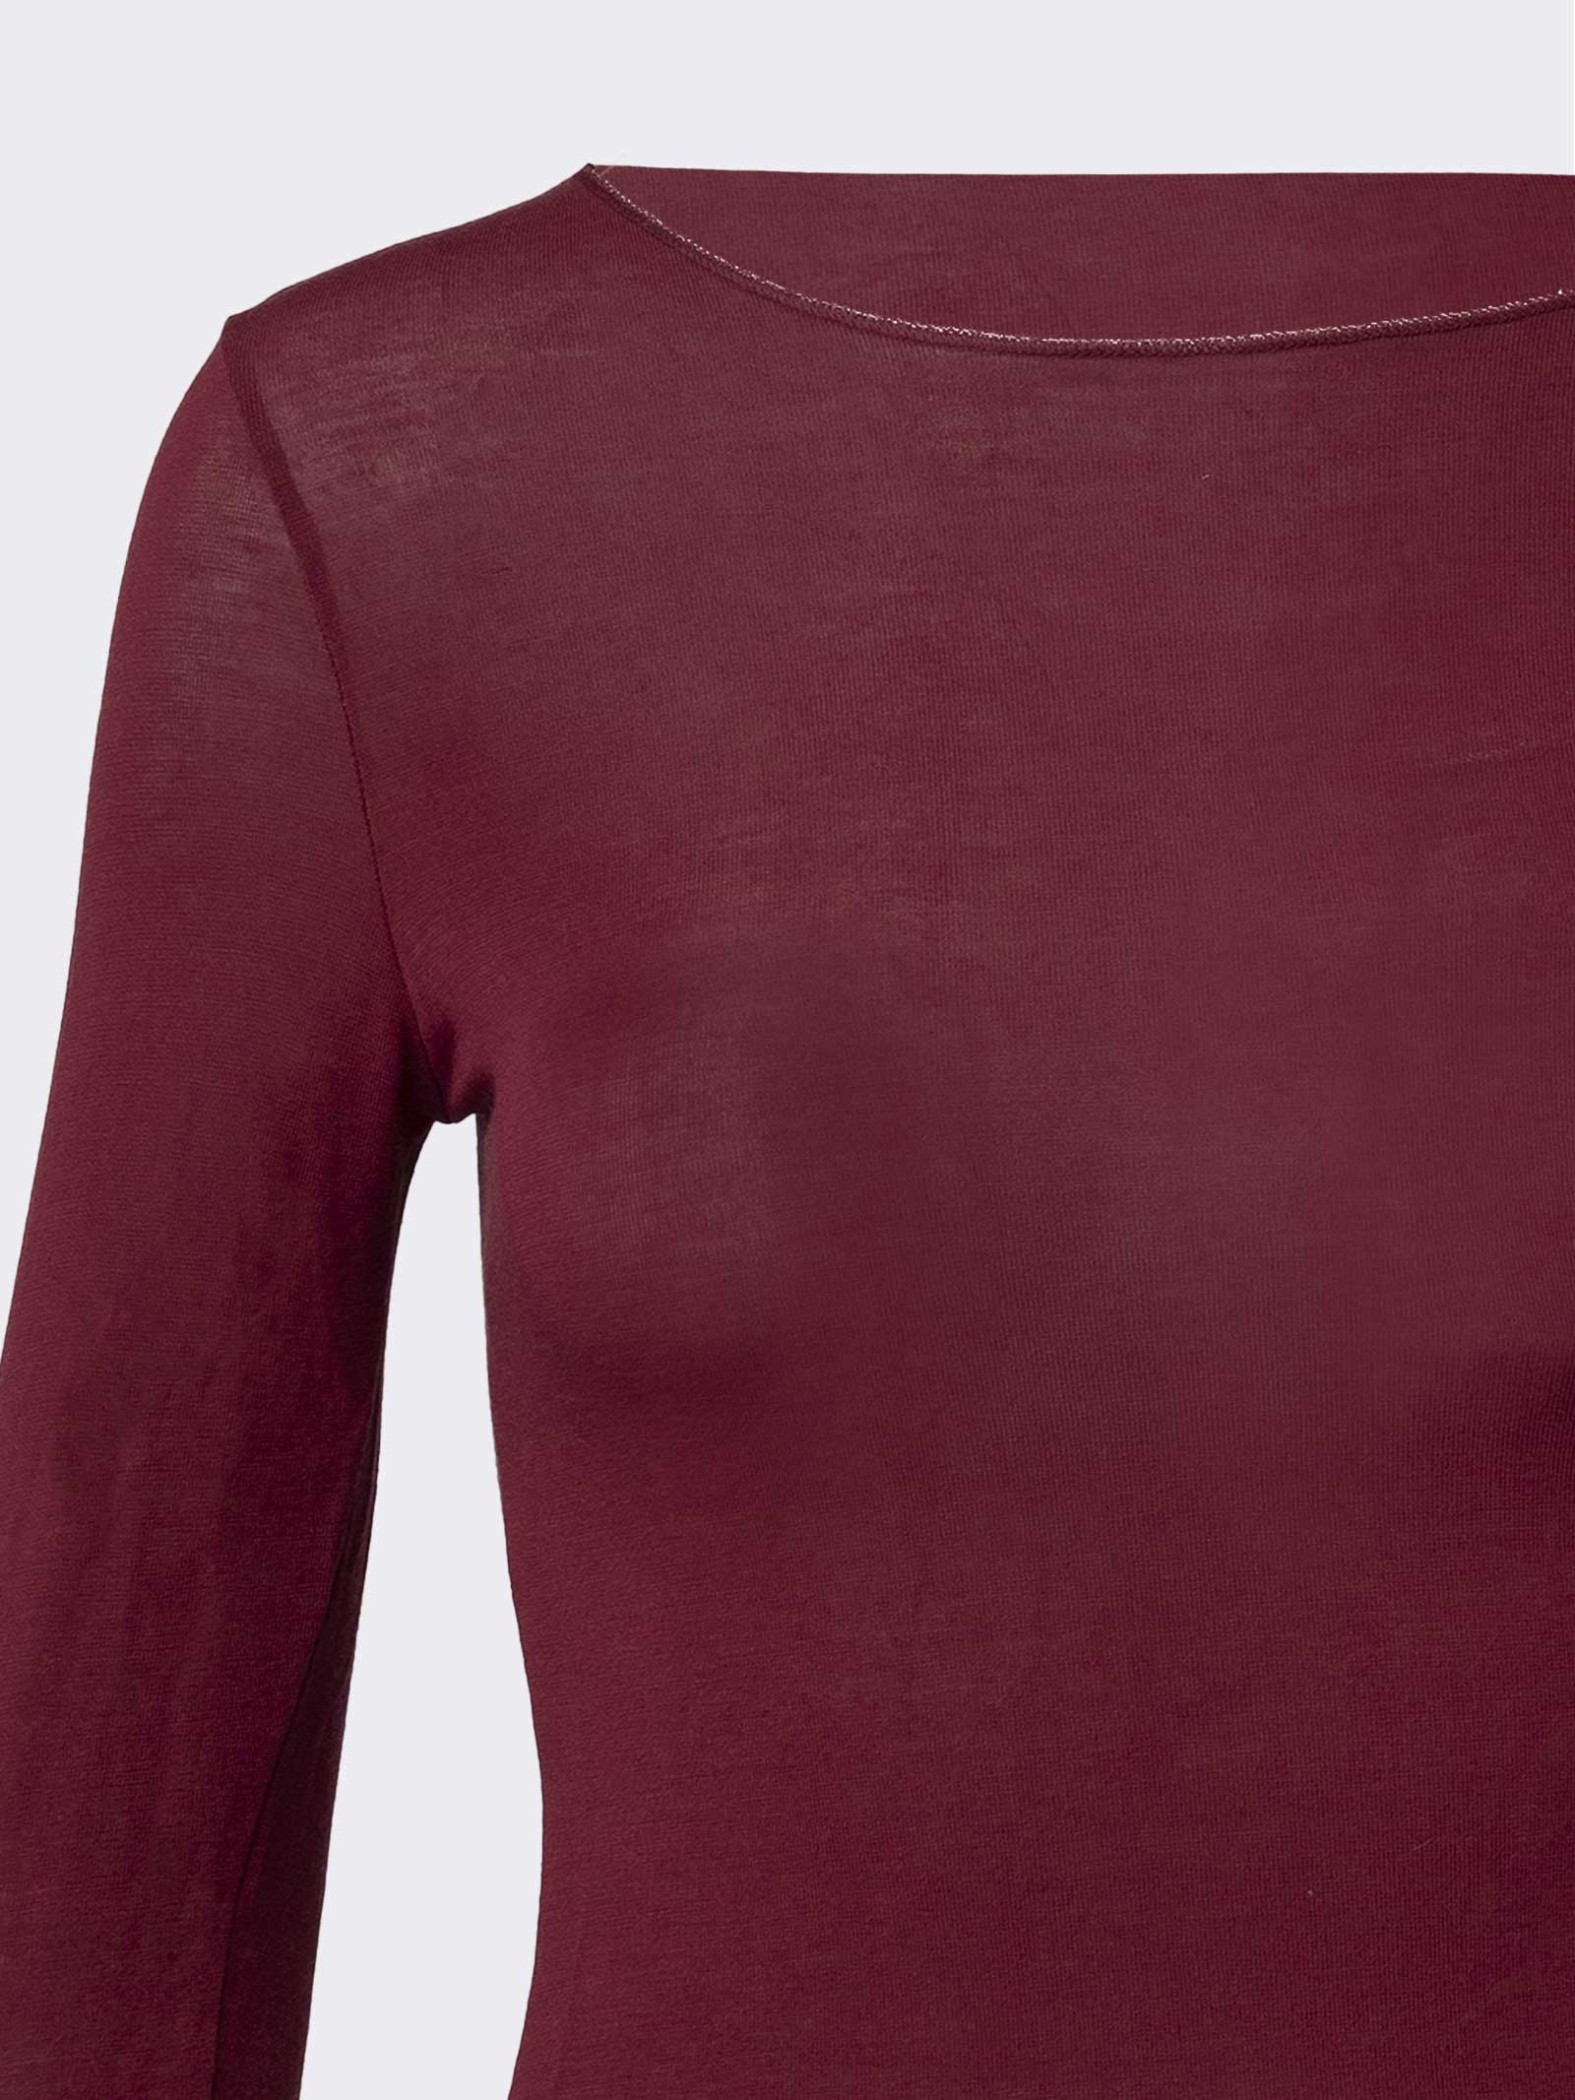 Women's Long-Sleeved Cashmere & Modal Boat Neck Knitwear - Elegant and Warm